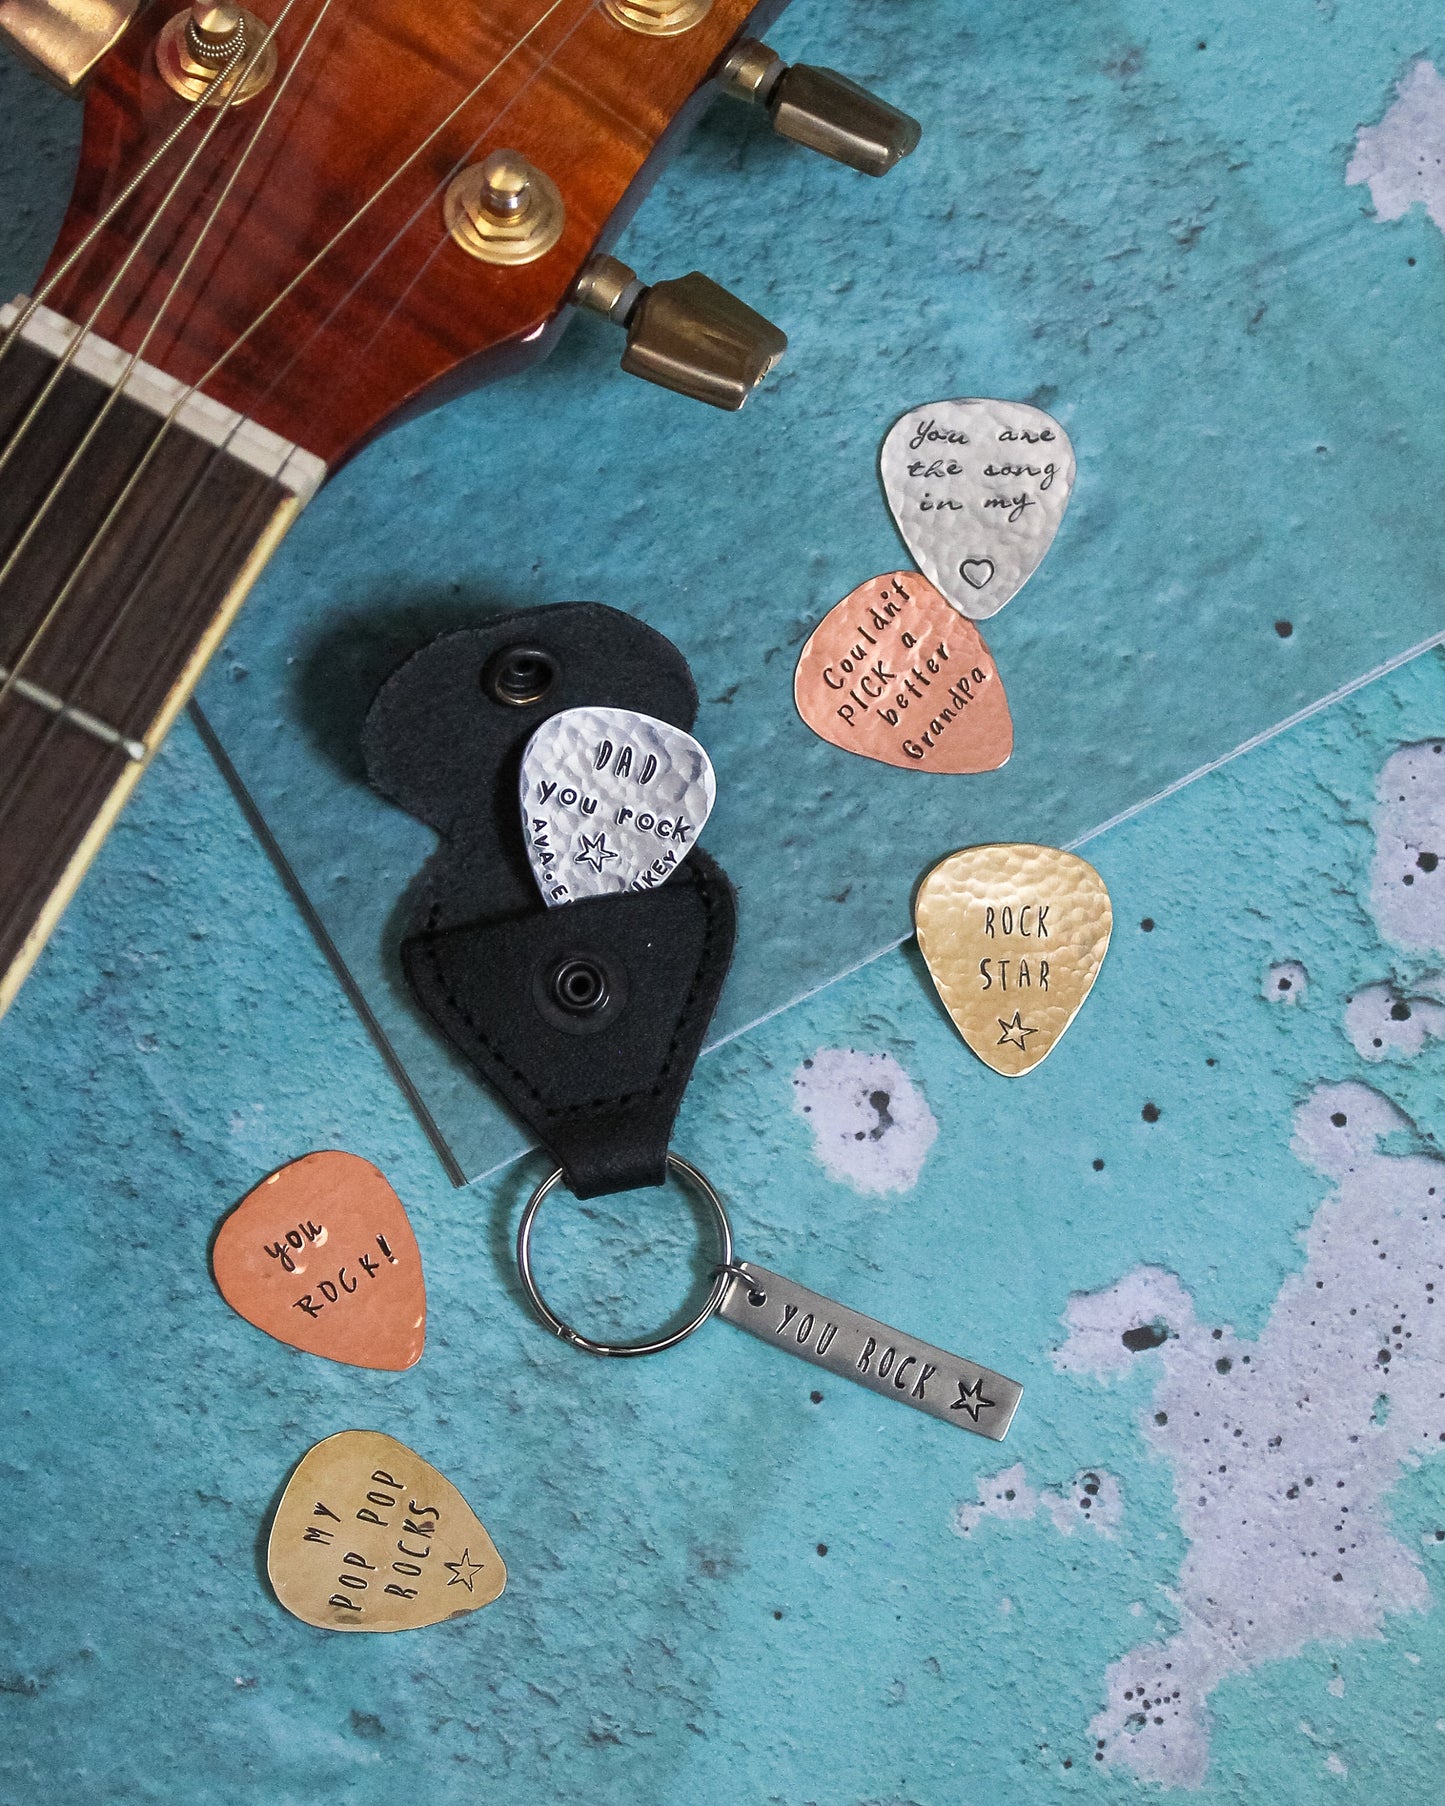 Guitar Pick Keychain with Case, Father's Day Gifts, Gifts for Him, Gifts for Guitar Players, You Rock, I Pick You, Personalized Hand Stamped